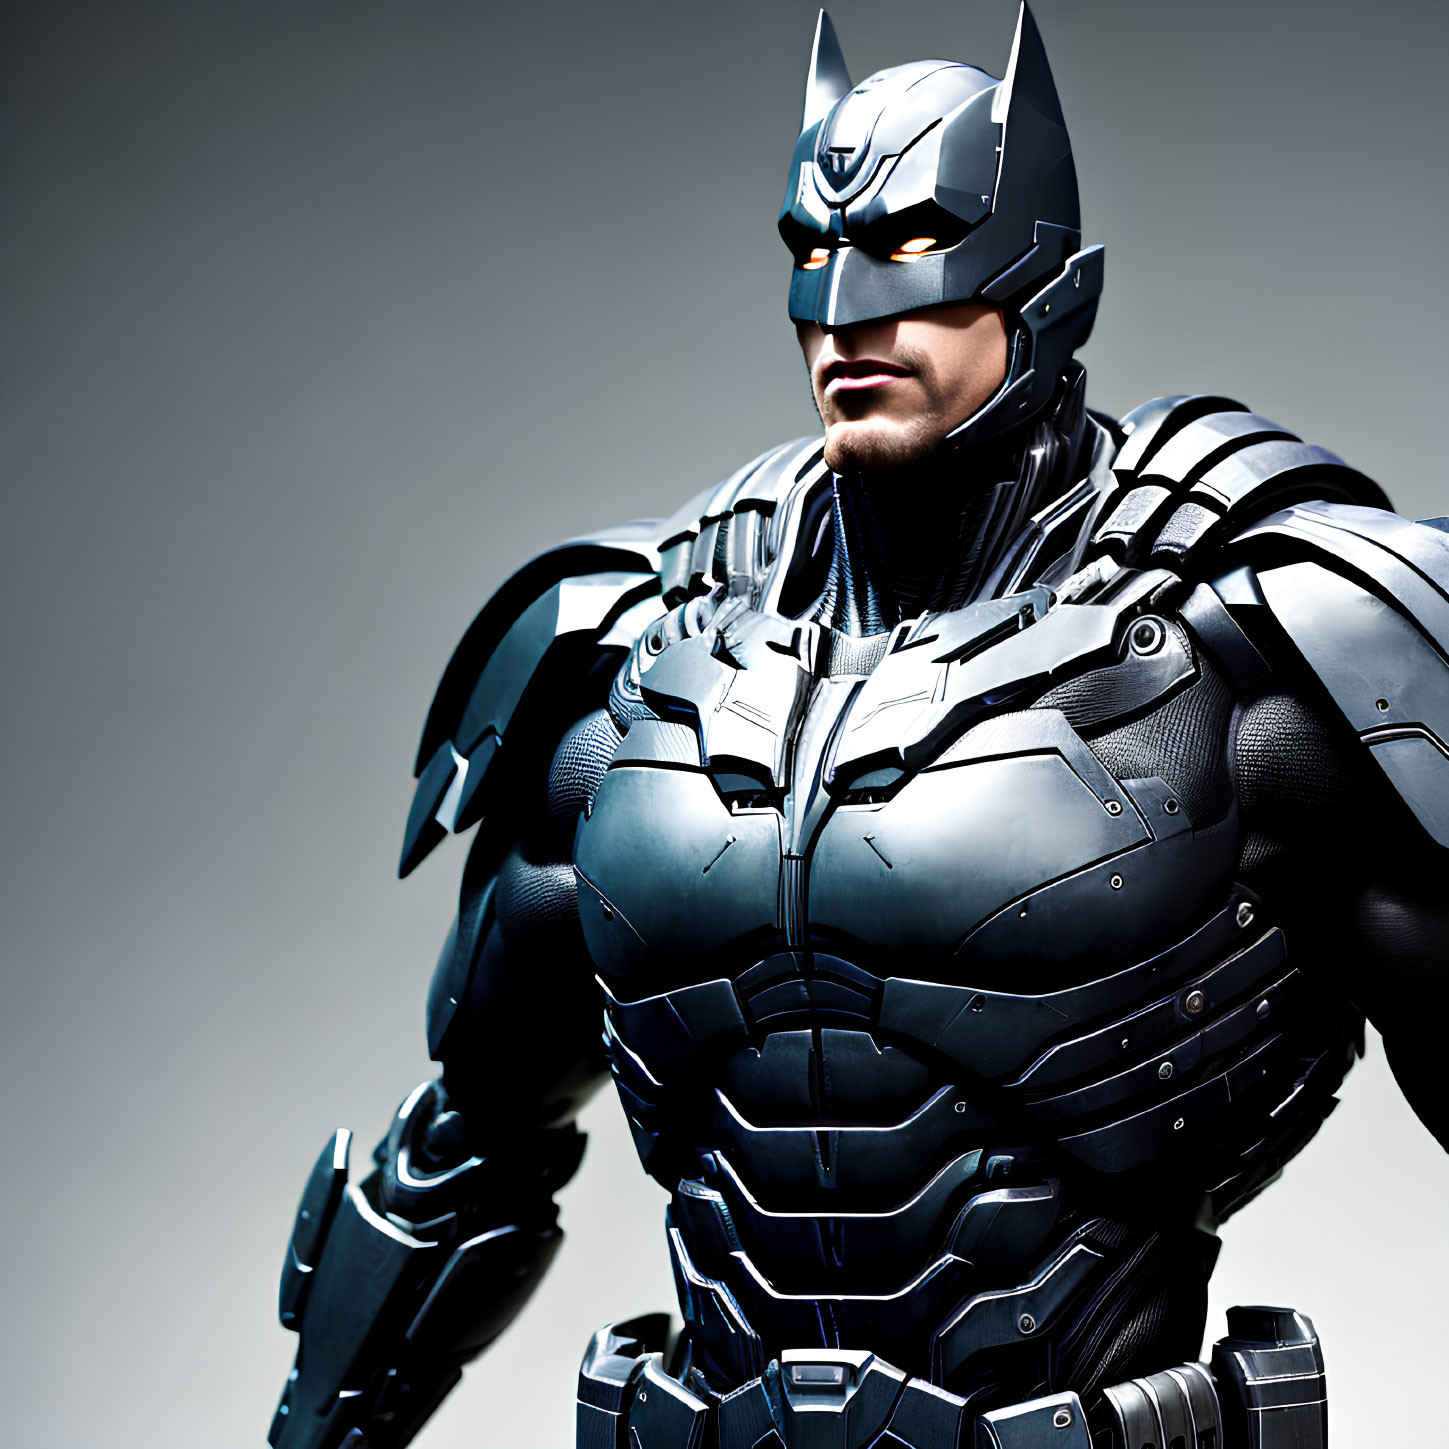 Detailed Futuristic Batman Costume with Muscular Armored Suit